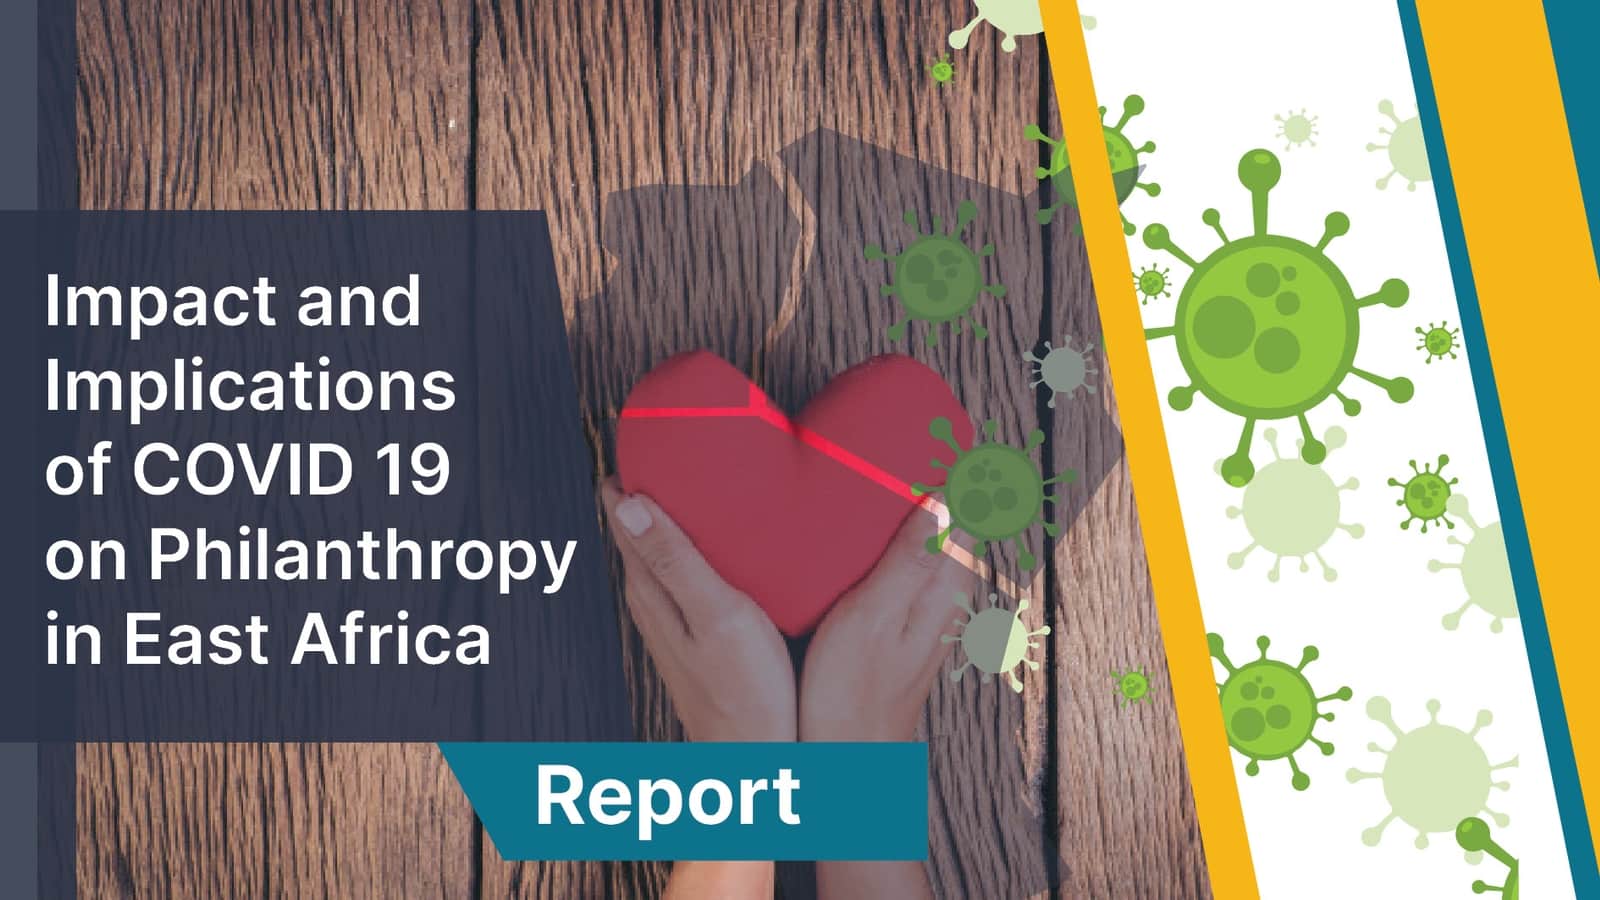 Impact and Implications of COVID-19 on Philanthropy Work in East Africa